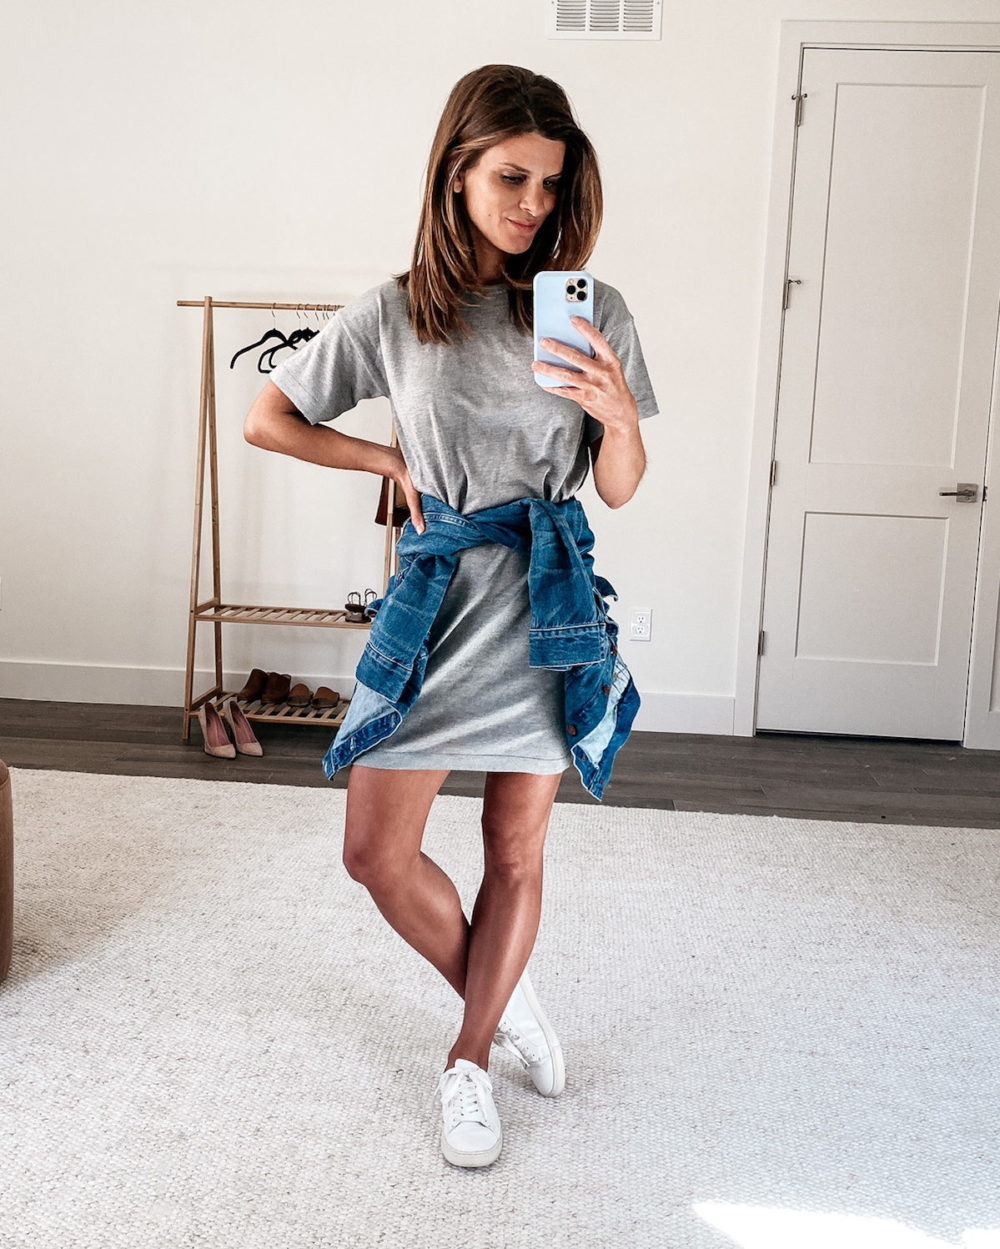 denim dress and white sneakers